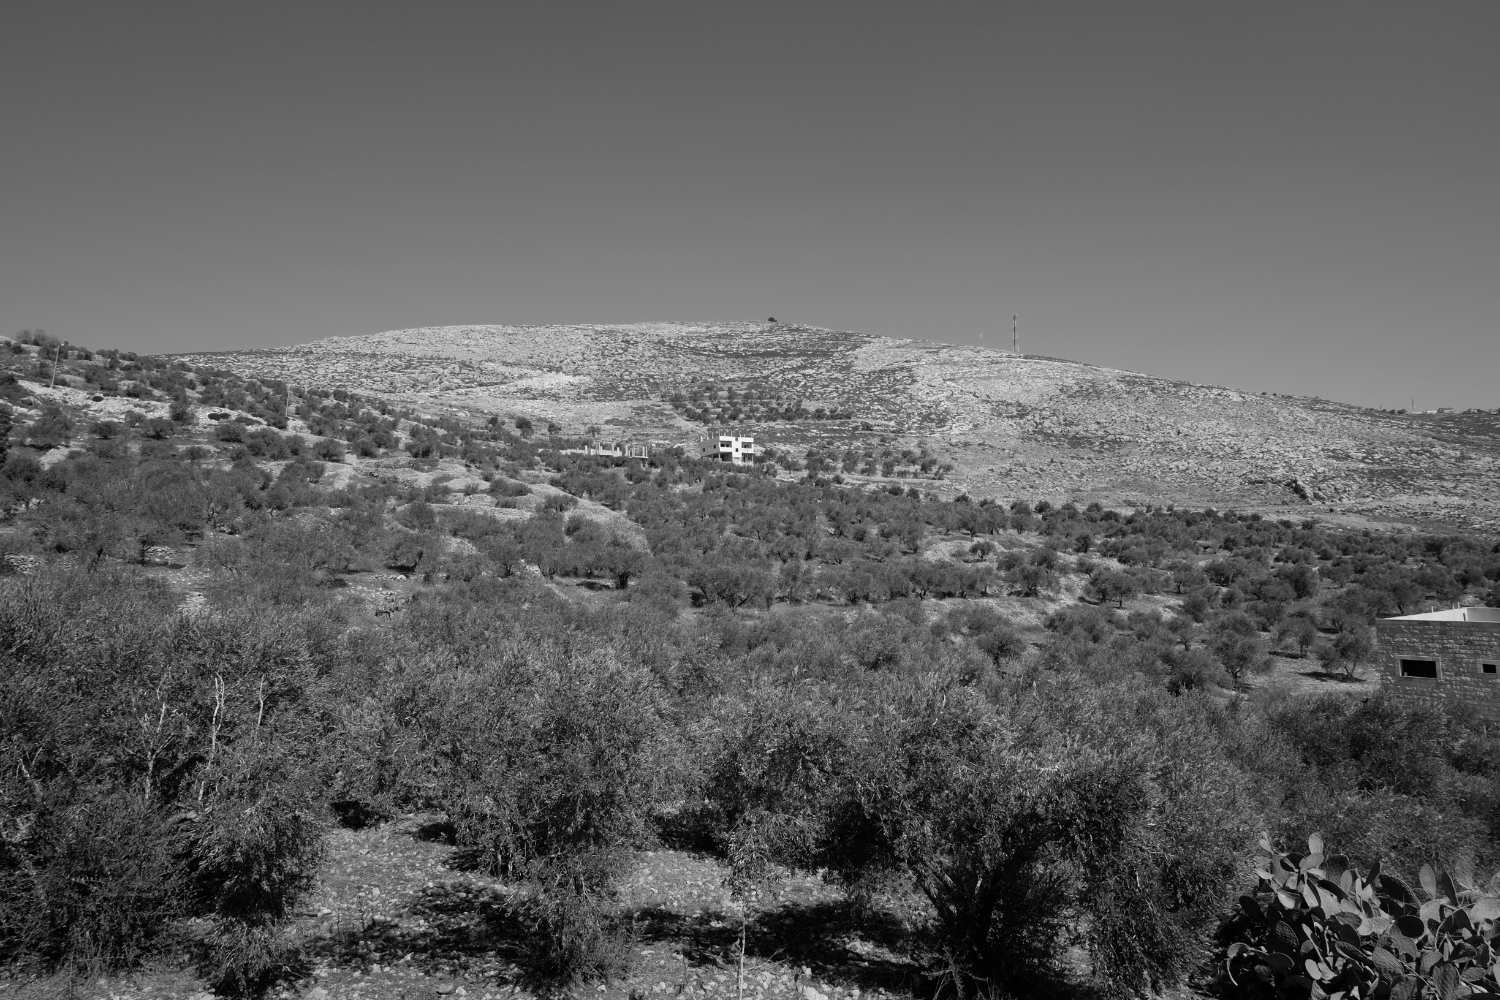  A view of the Israeli settlement Giv'at Sne Ya'akov from Burin.&nbsp; 